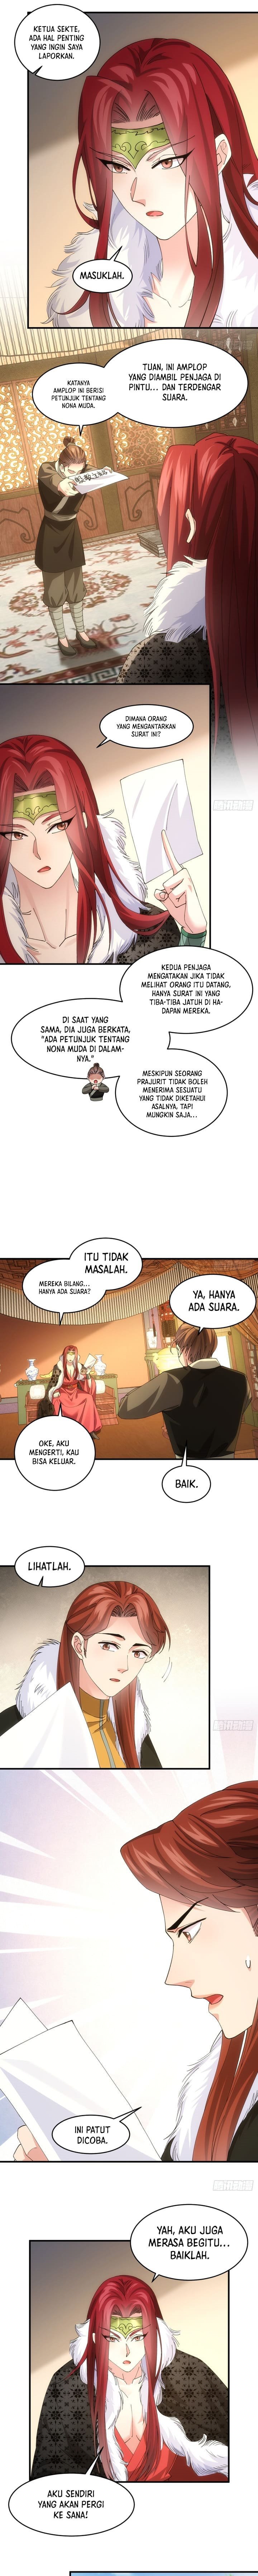 Dilarang COPAS - situs resmi www.mangacanblog.com - Komik i just dont play the card according to the routine 146 - chapter 146 147 Indonesia i just dont play the card according to the routine 146 - chapter 146 Terbaru 5|Baca Manga Komik Indonesia|Mangacan